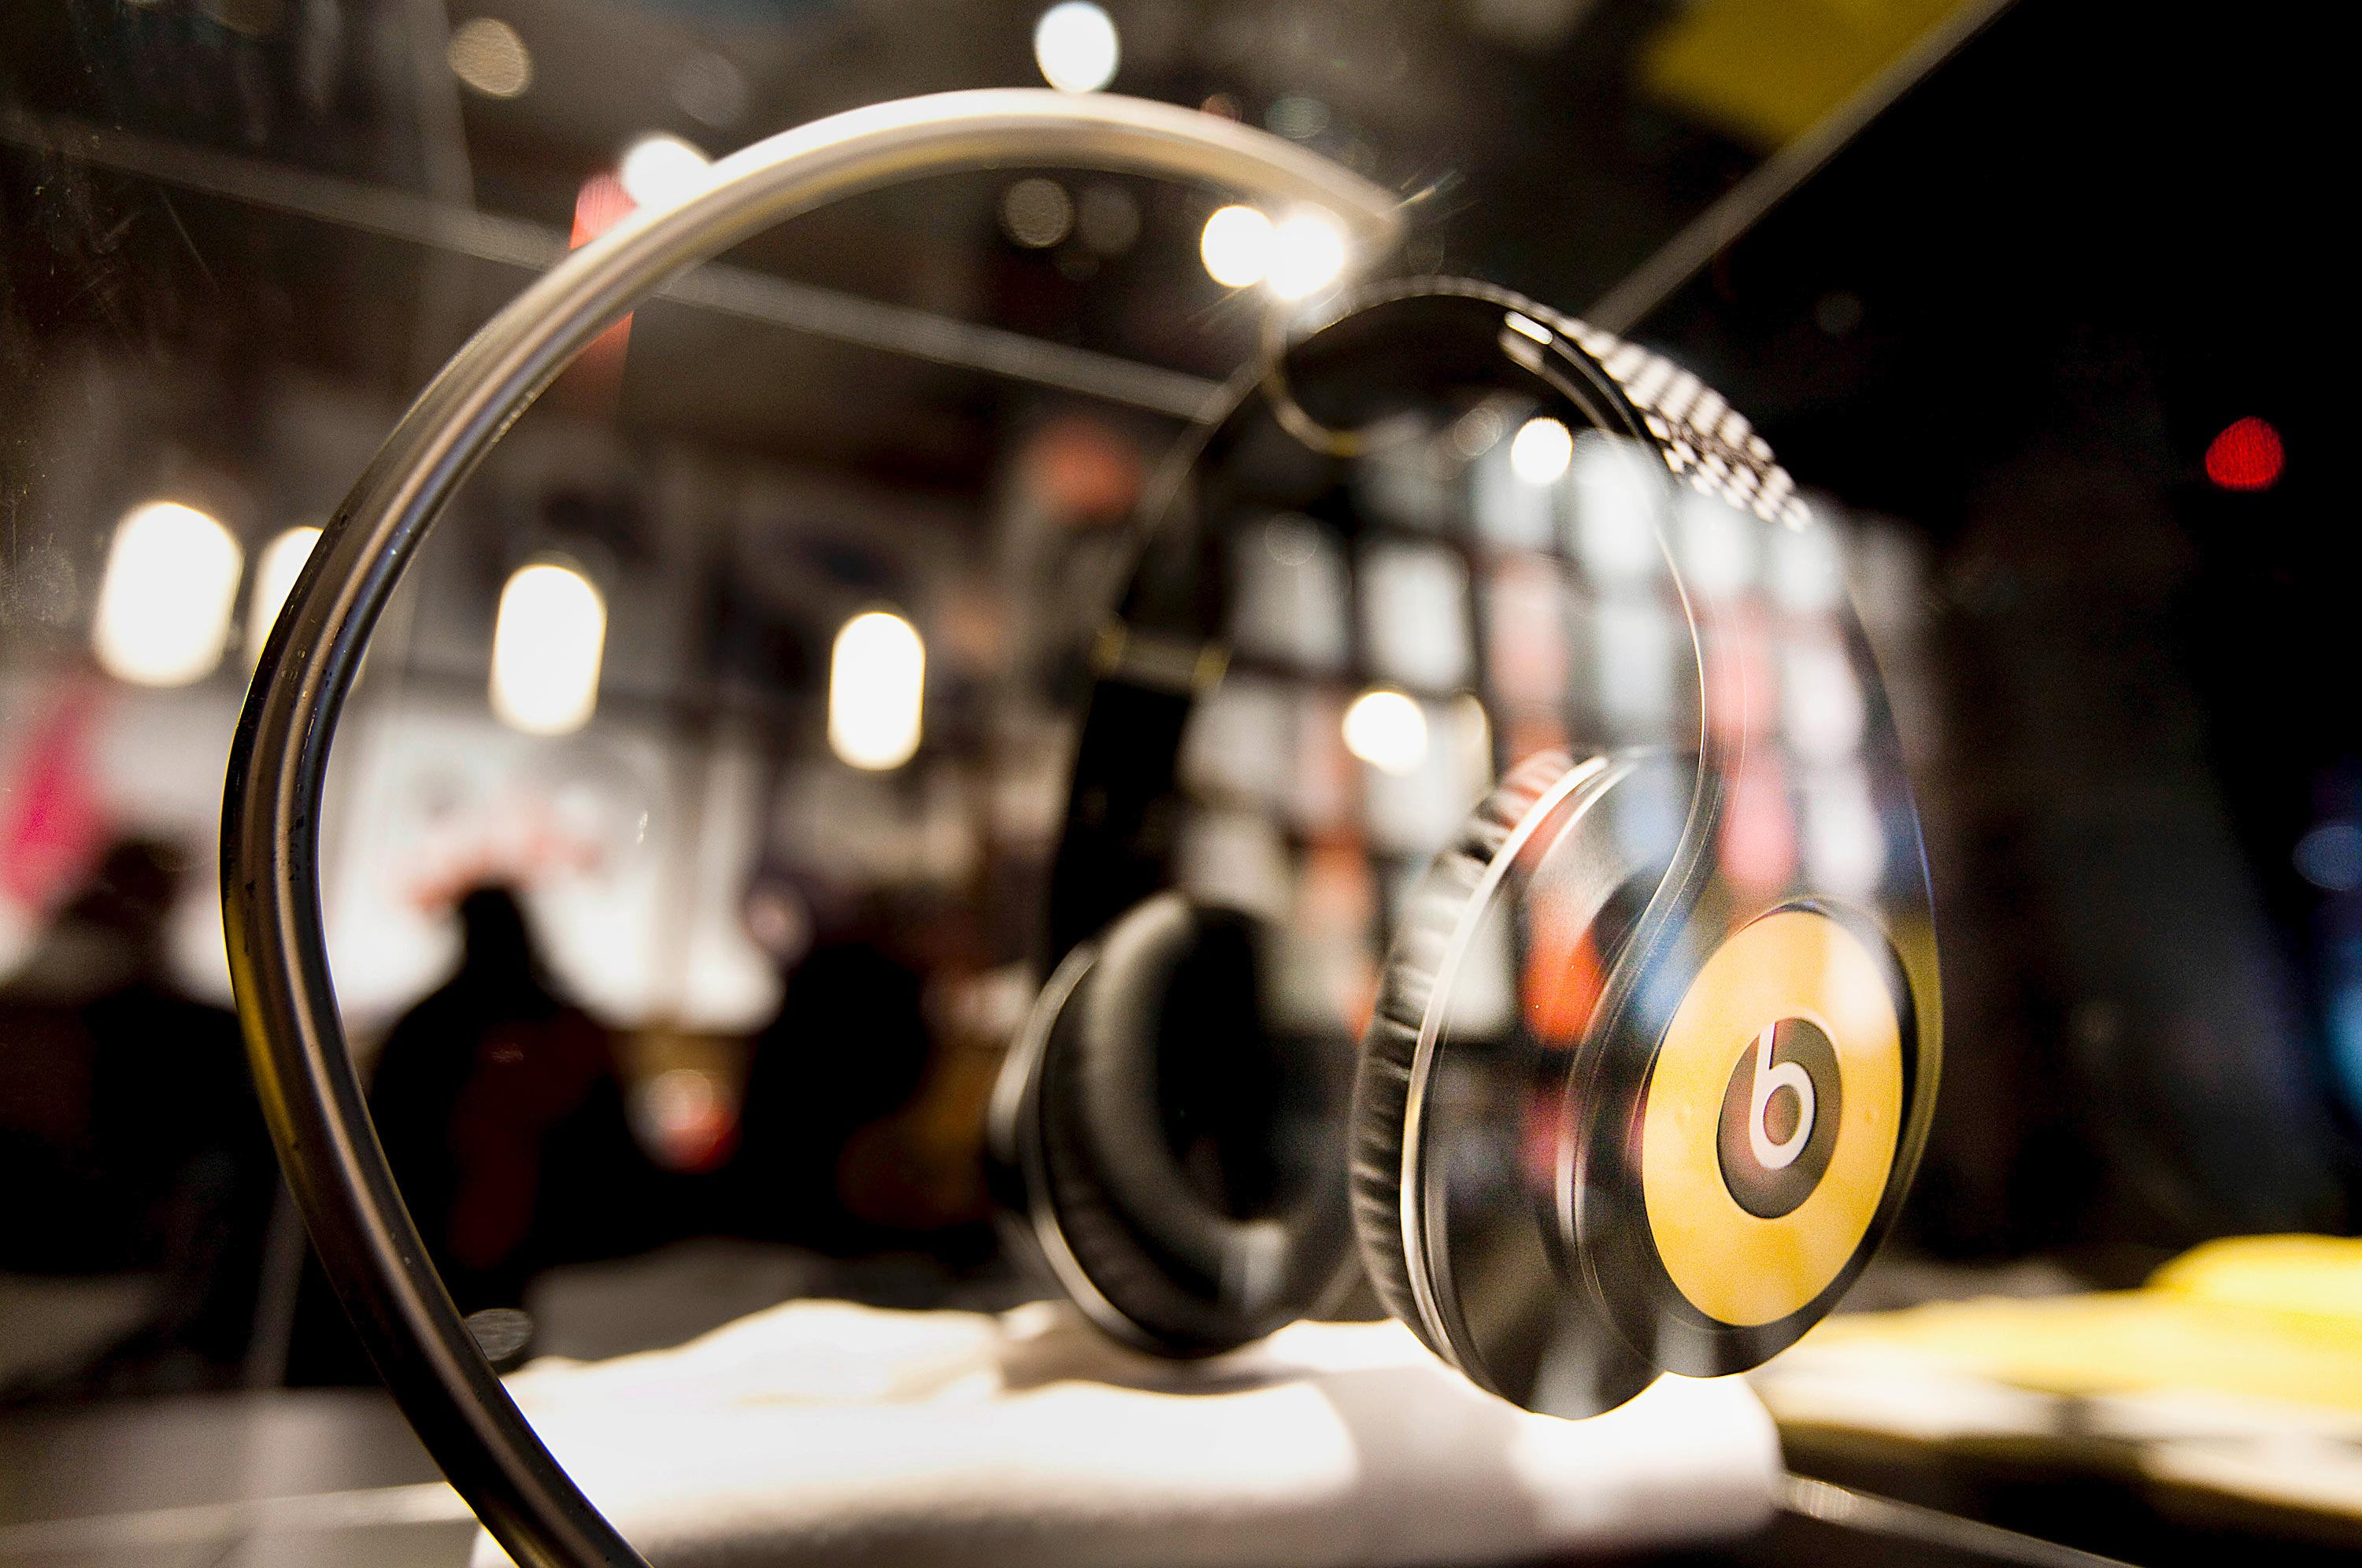 A pair of Beats Electronics LLC &quot;Taxi&quot; headphones at the Beats by Dr. Dre pop-up store in New York, on April 13, 2012. Photographer: Michael Nagle/Bloomberg